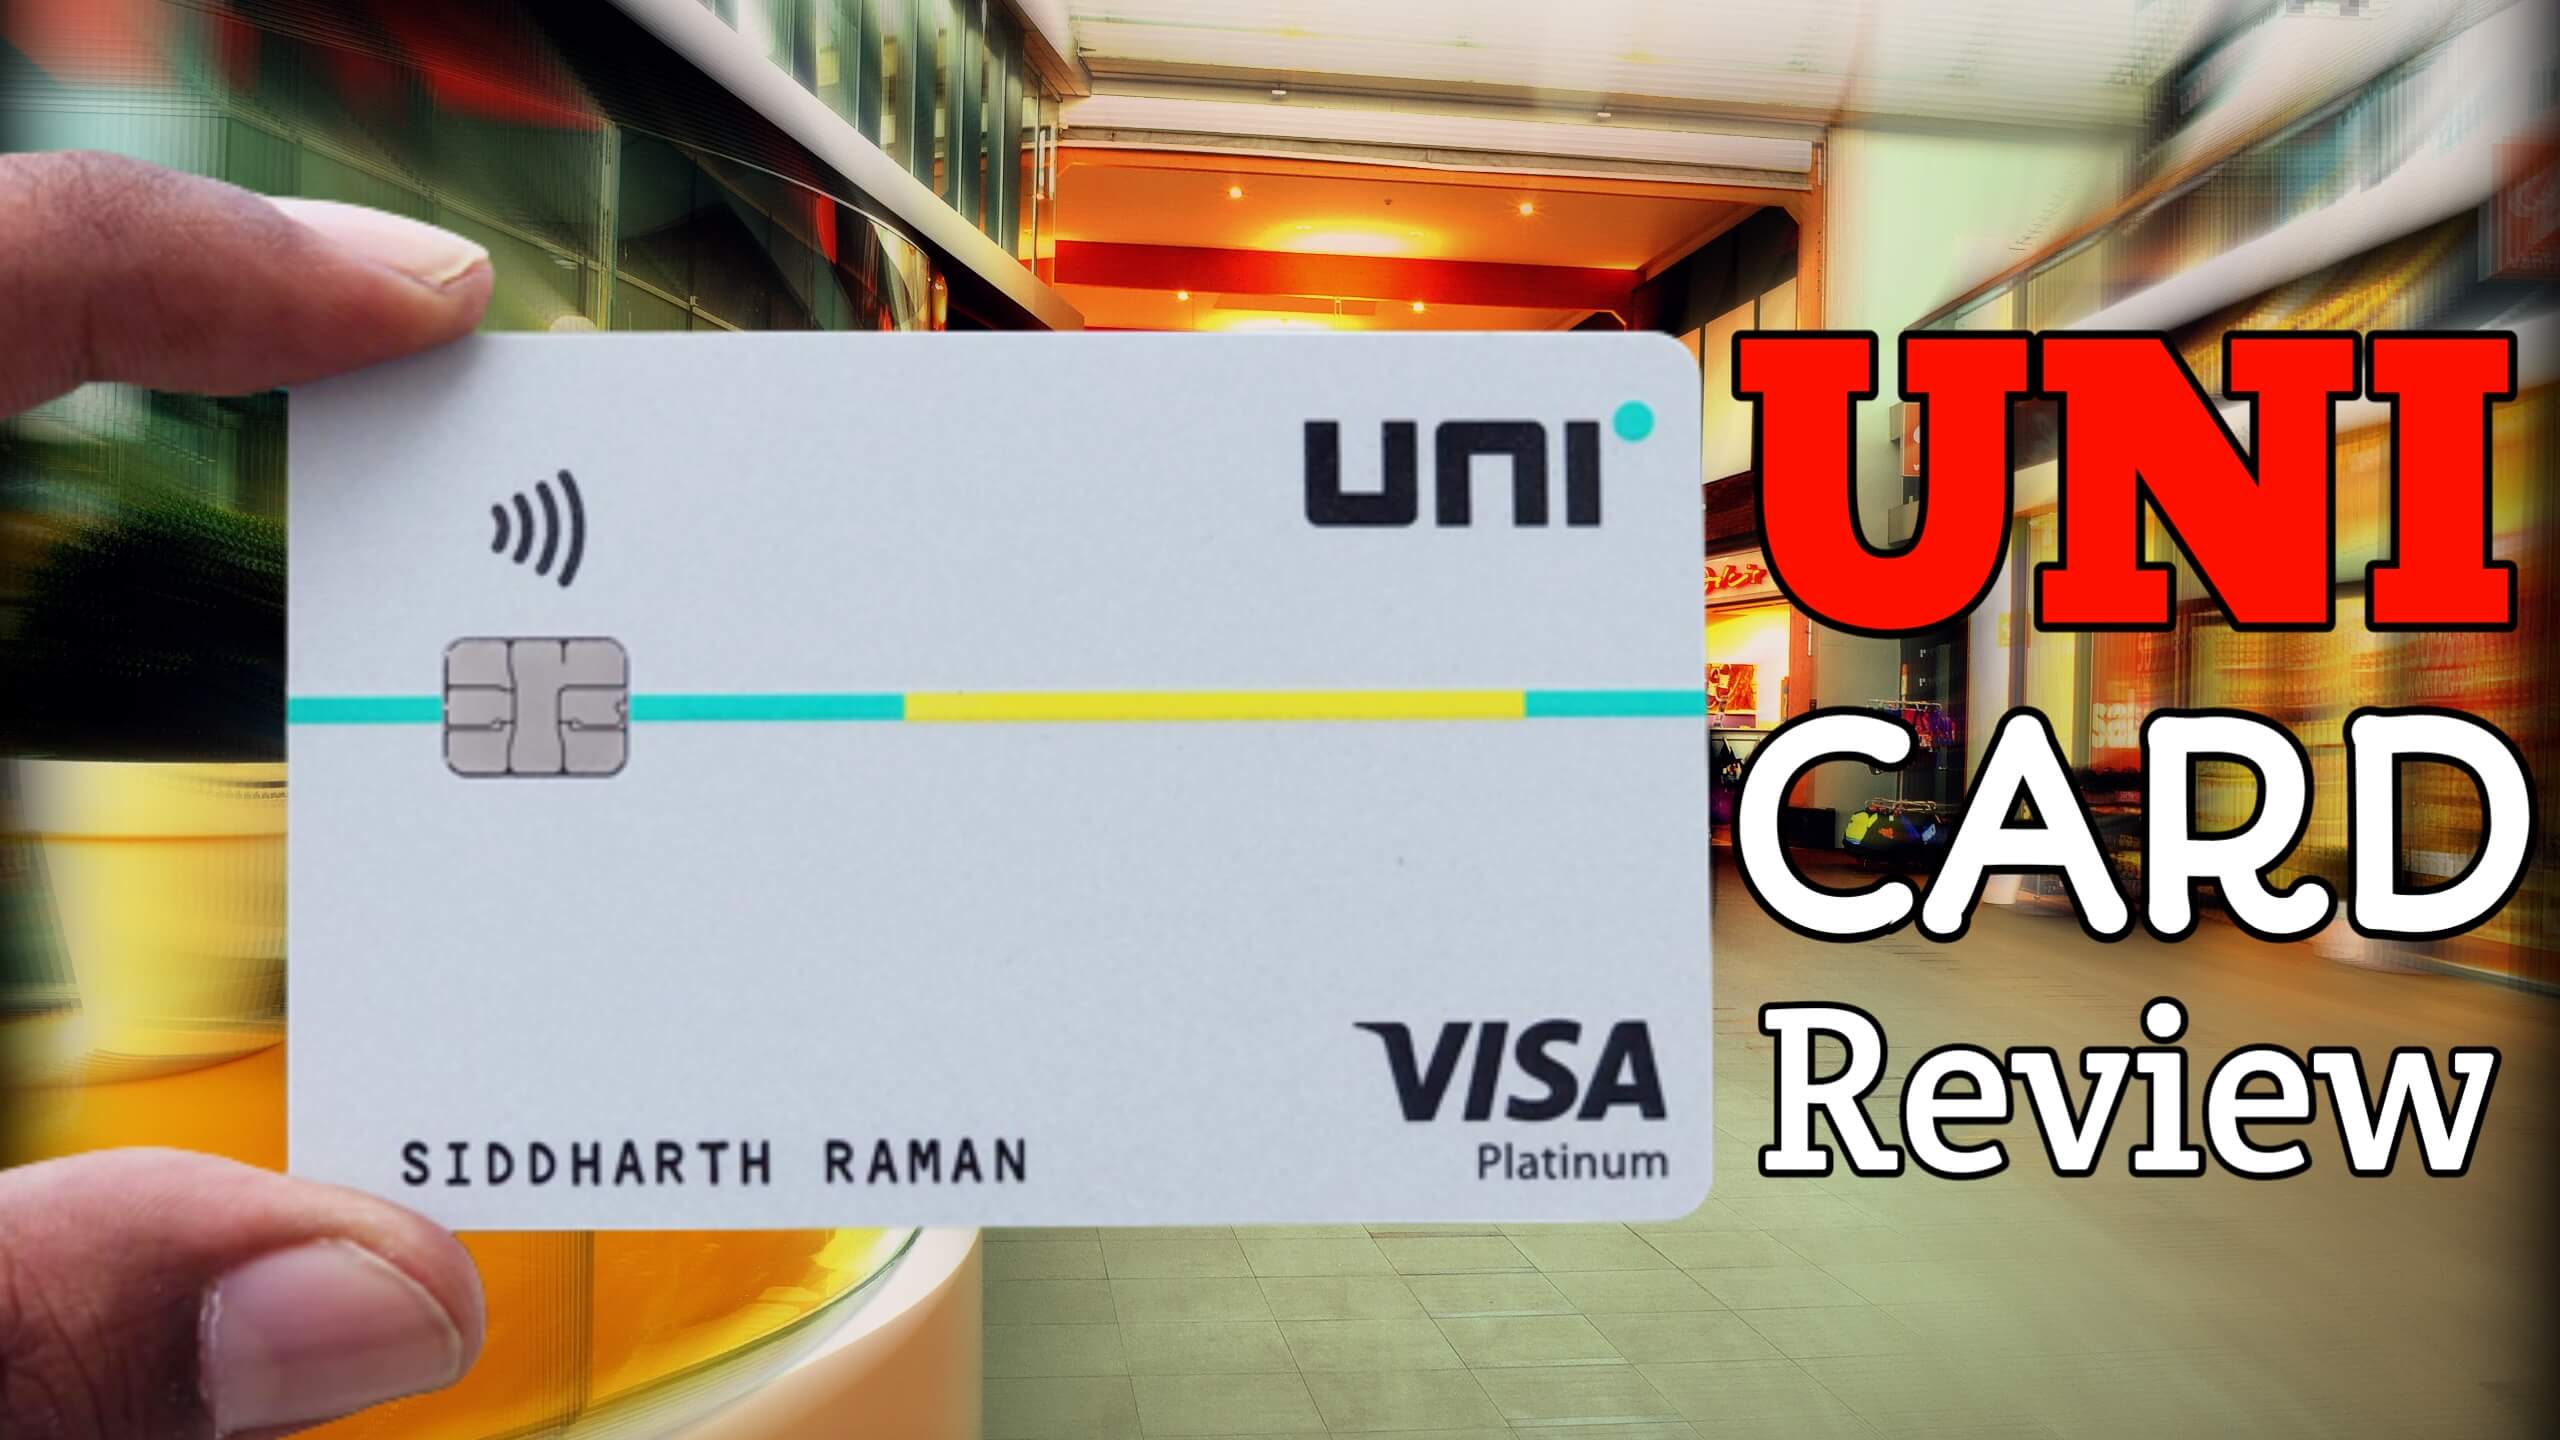 UNICARD review: benefits of the account system and where to use free ( Pay 1/3rd Card )